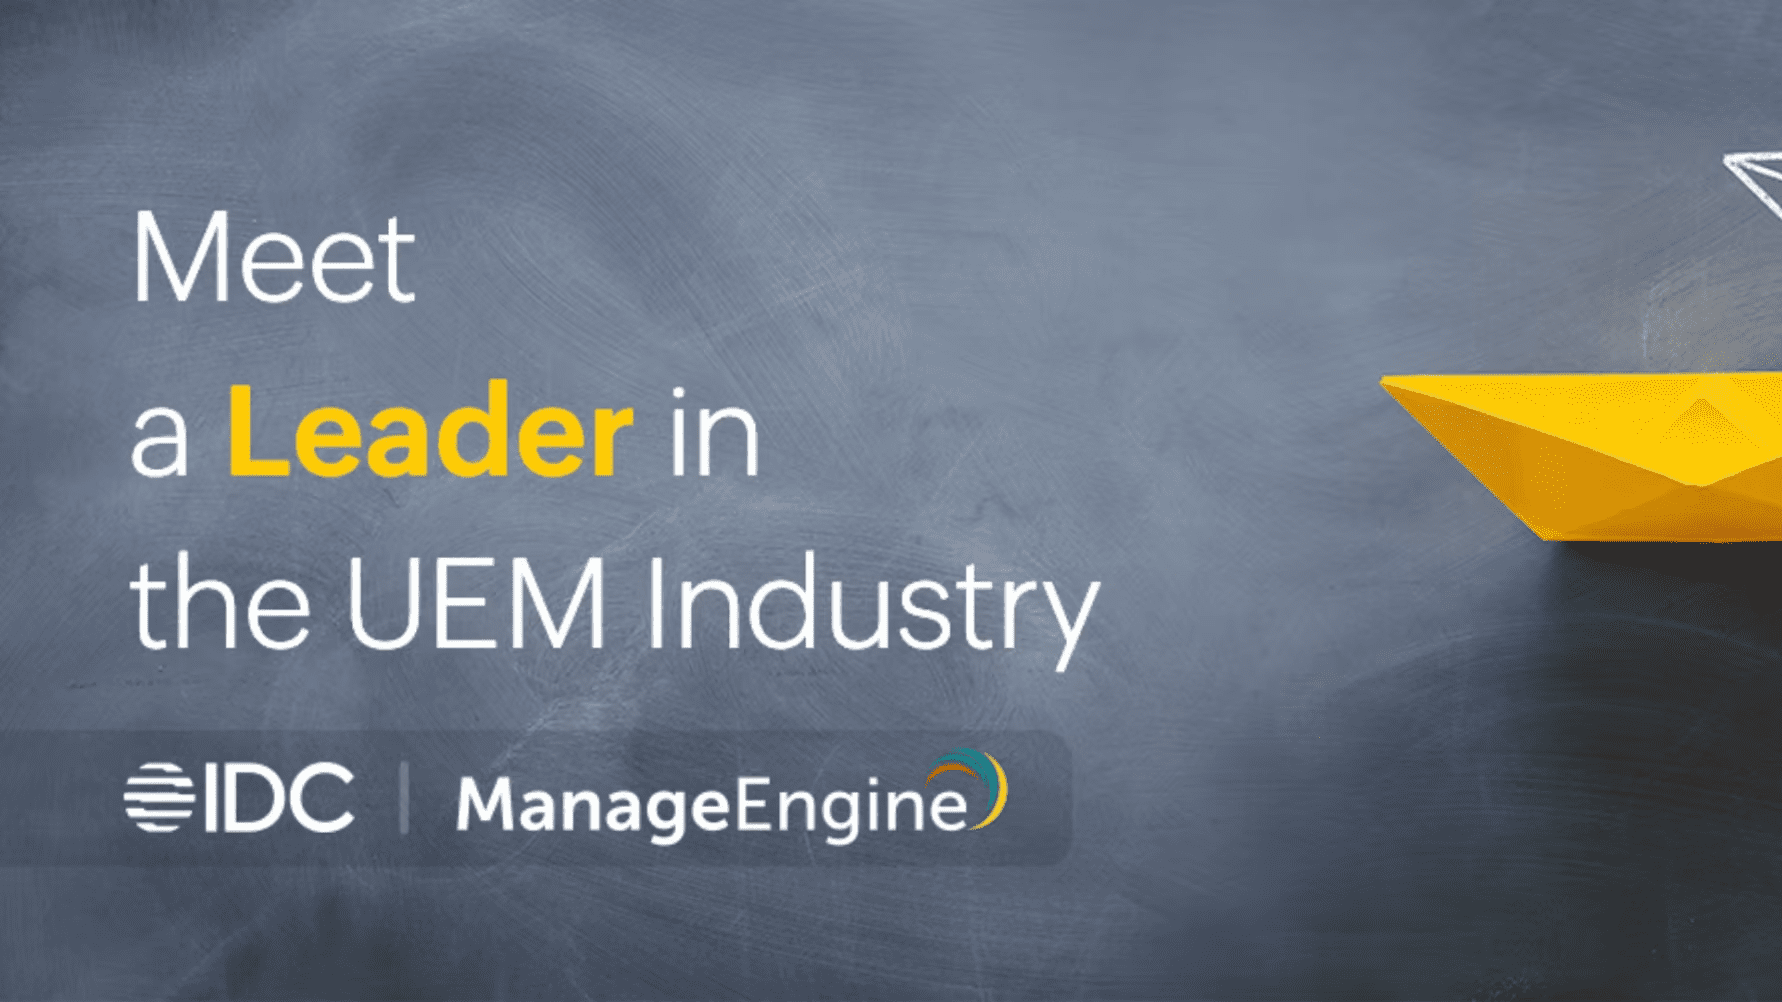 ManageEngine utsetts till Leader i IDC MarketScape for Unified Endpoint Management